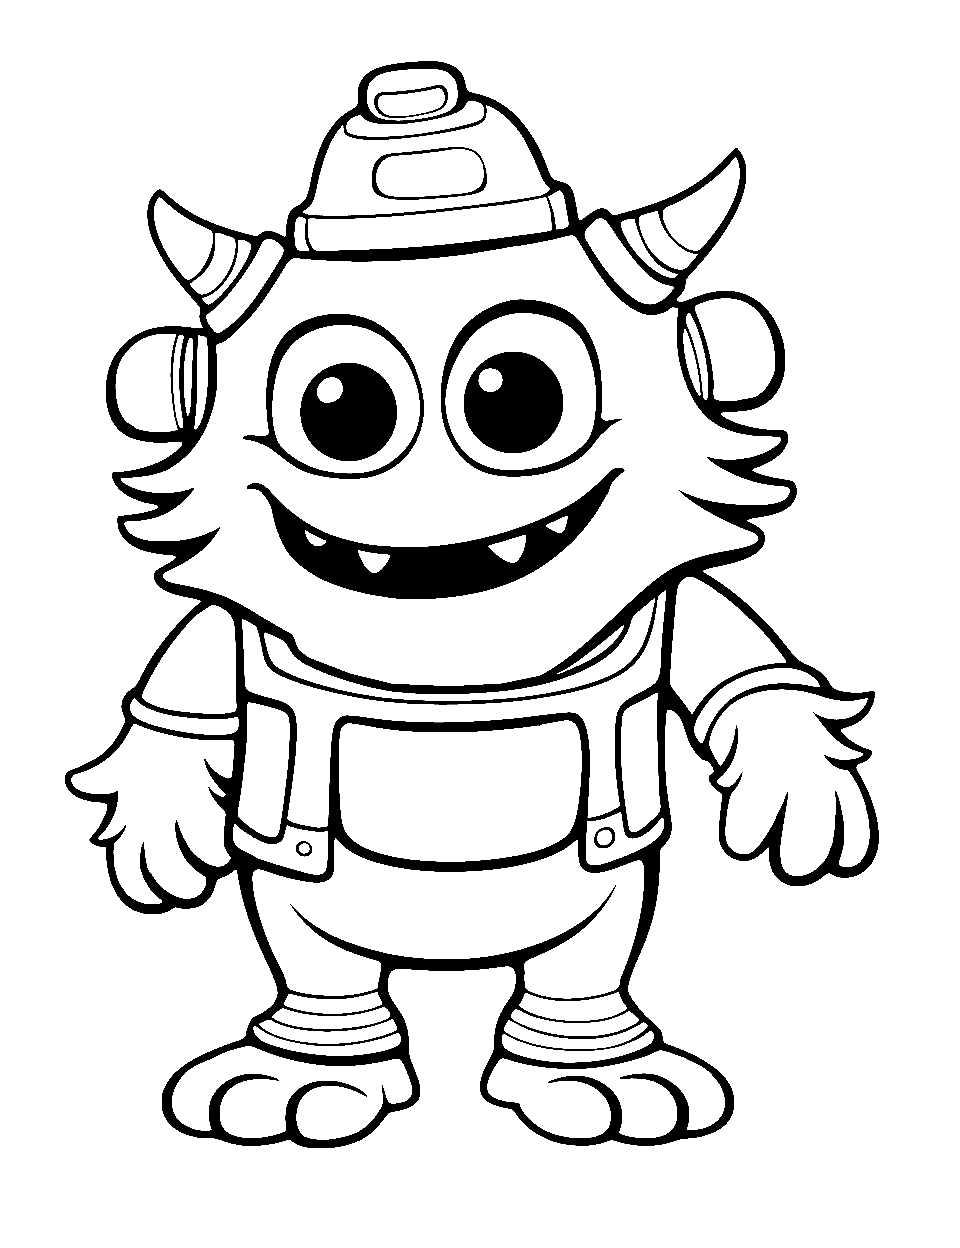 Monster as a Firefighter Coloring Page - A brave monster dressed as a firefighter, ready for action.